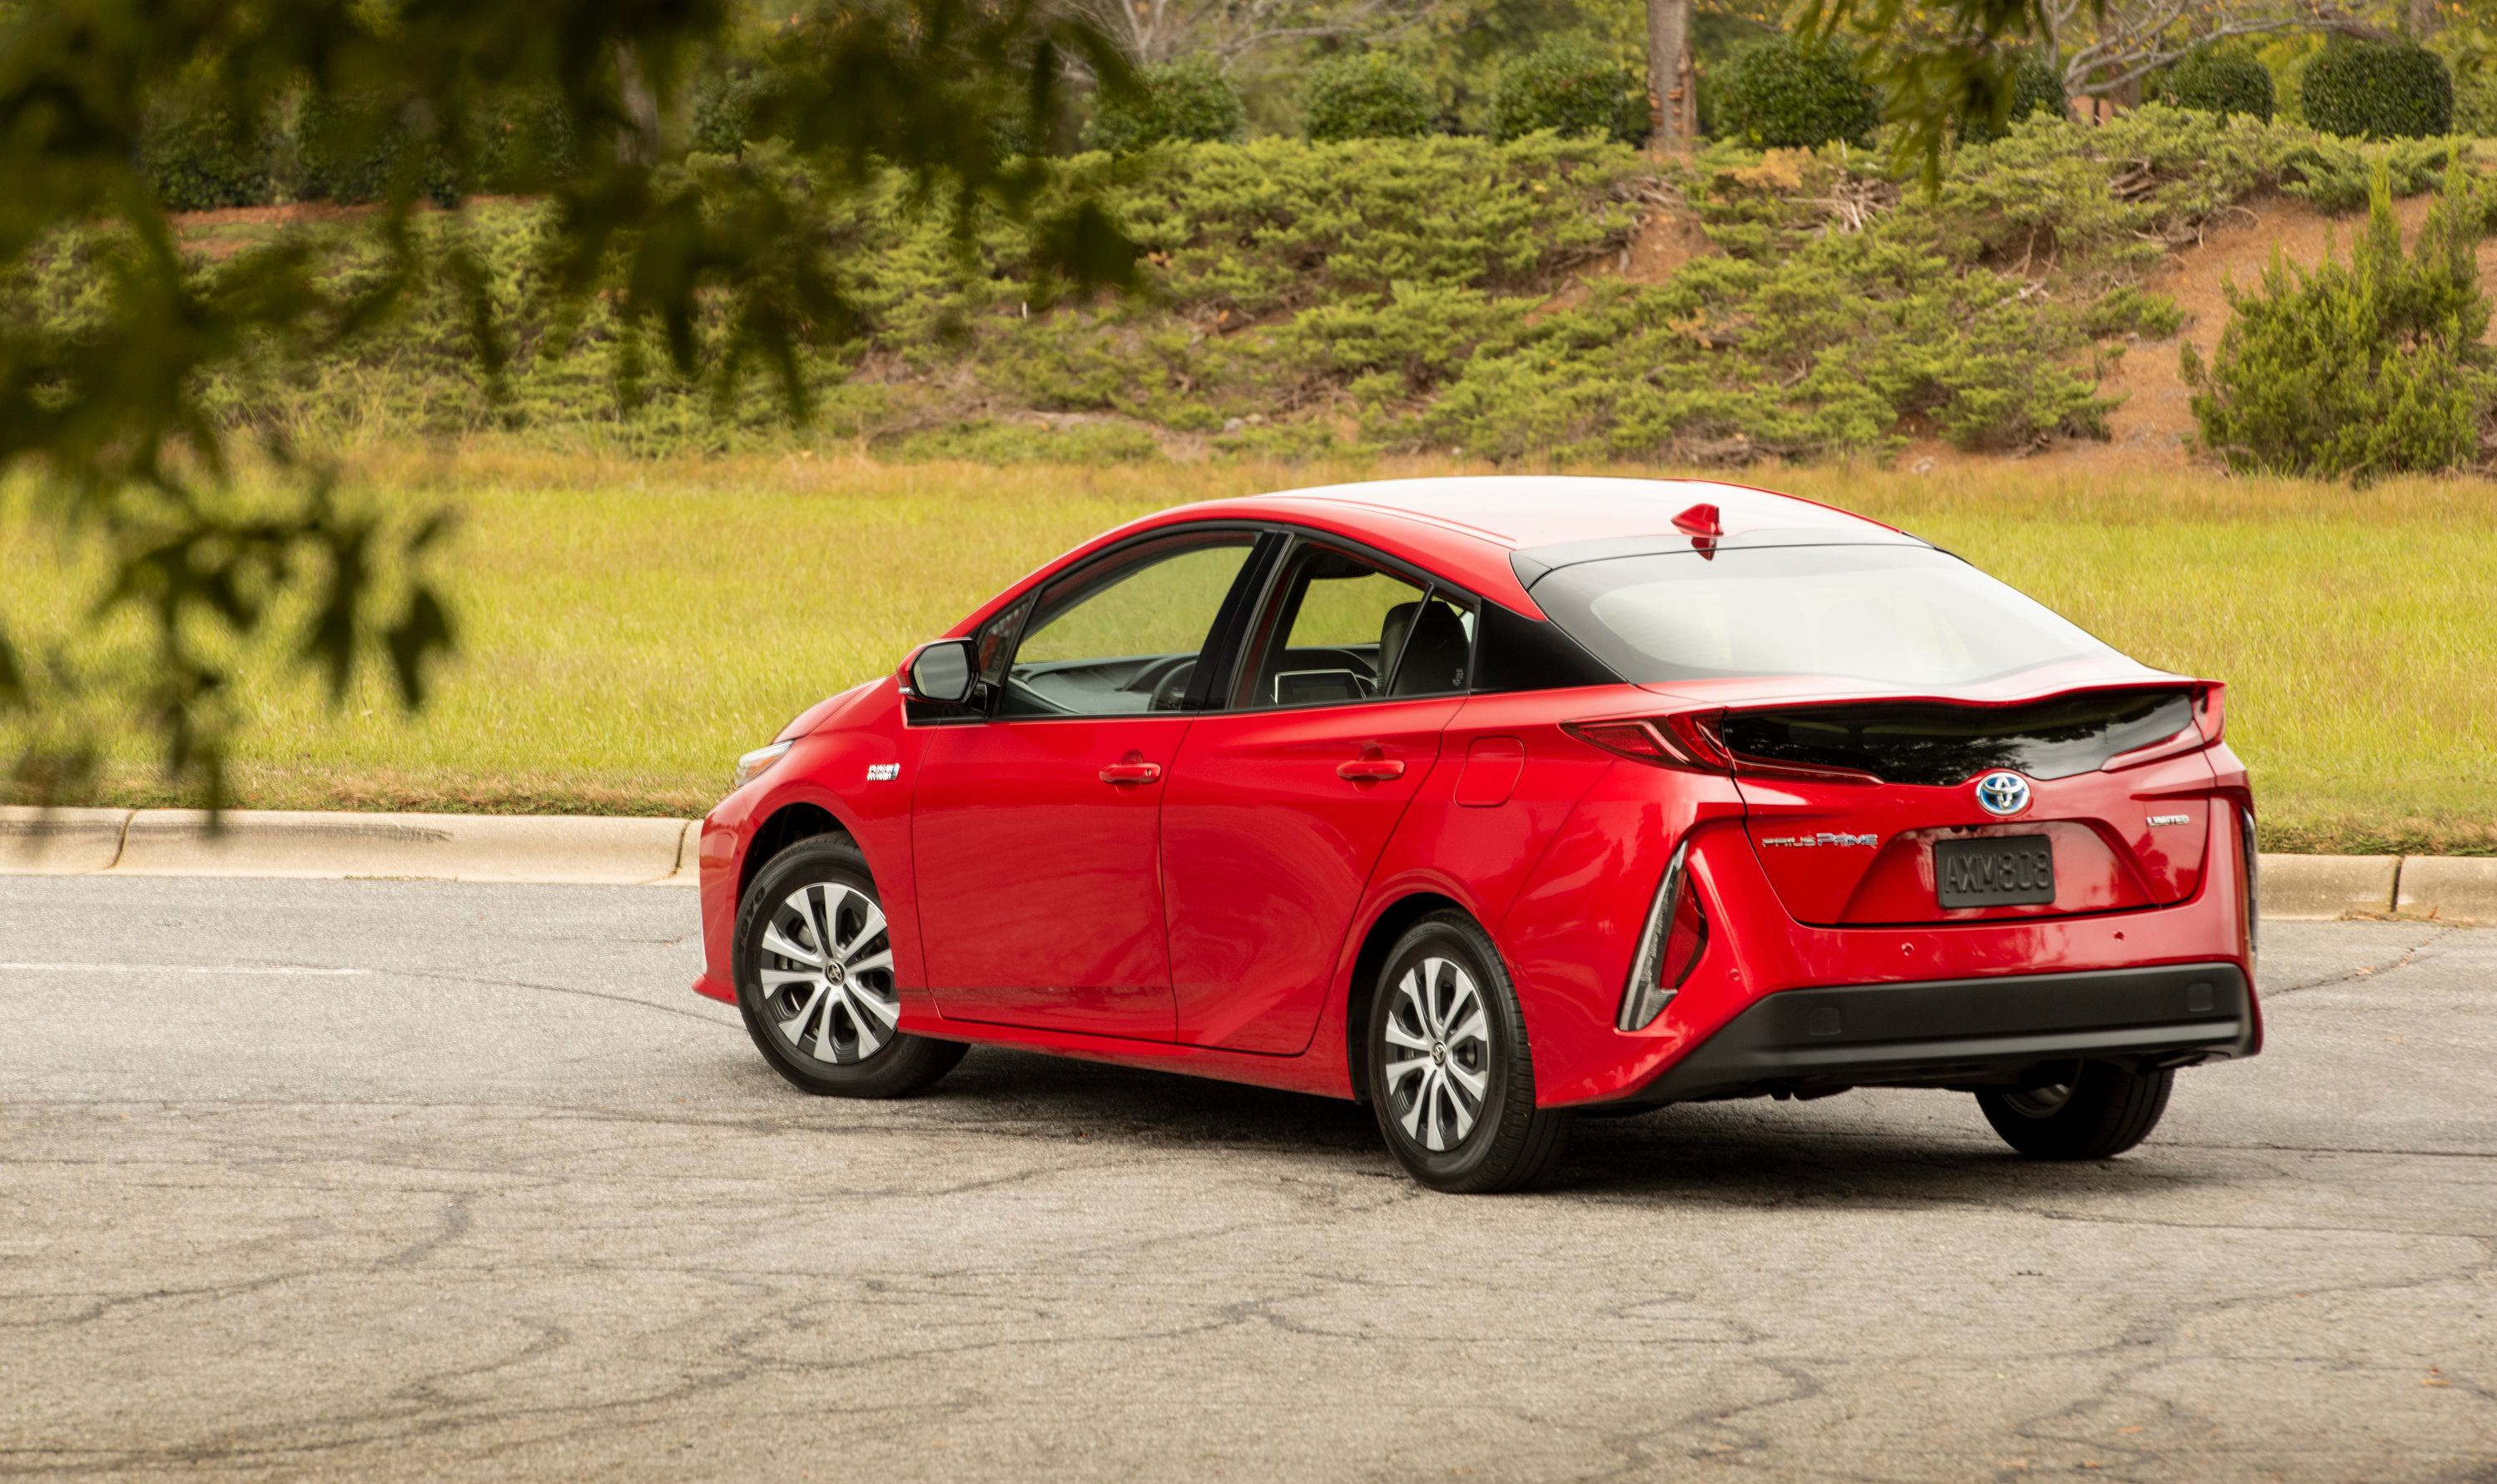 2022 Toyota Prius Prime Review Pricing And Specs Lupon gov ph